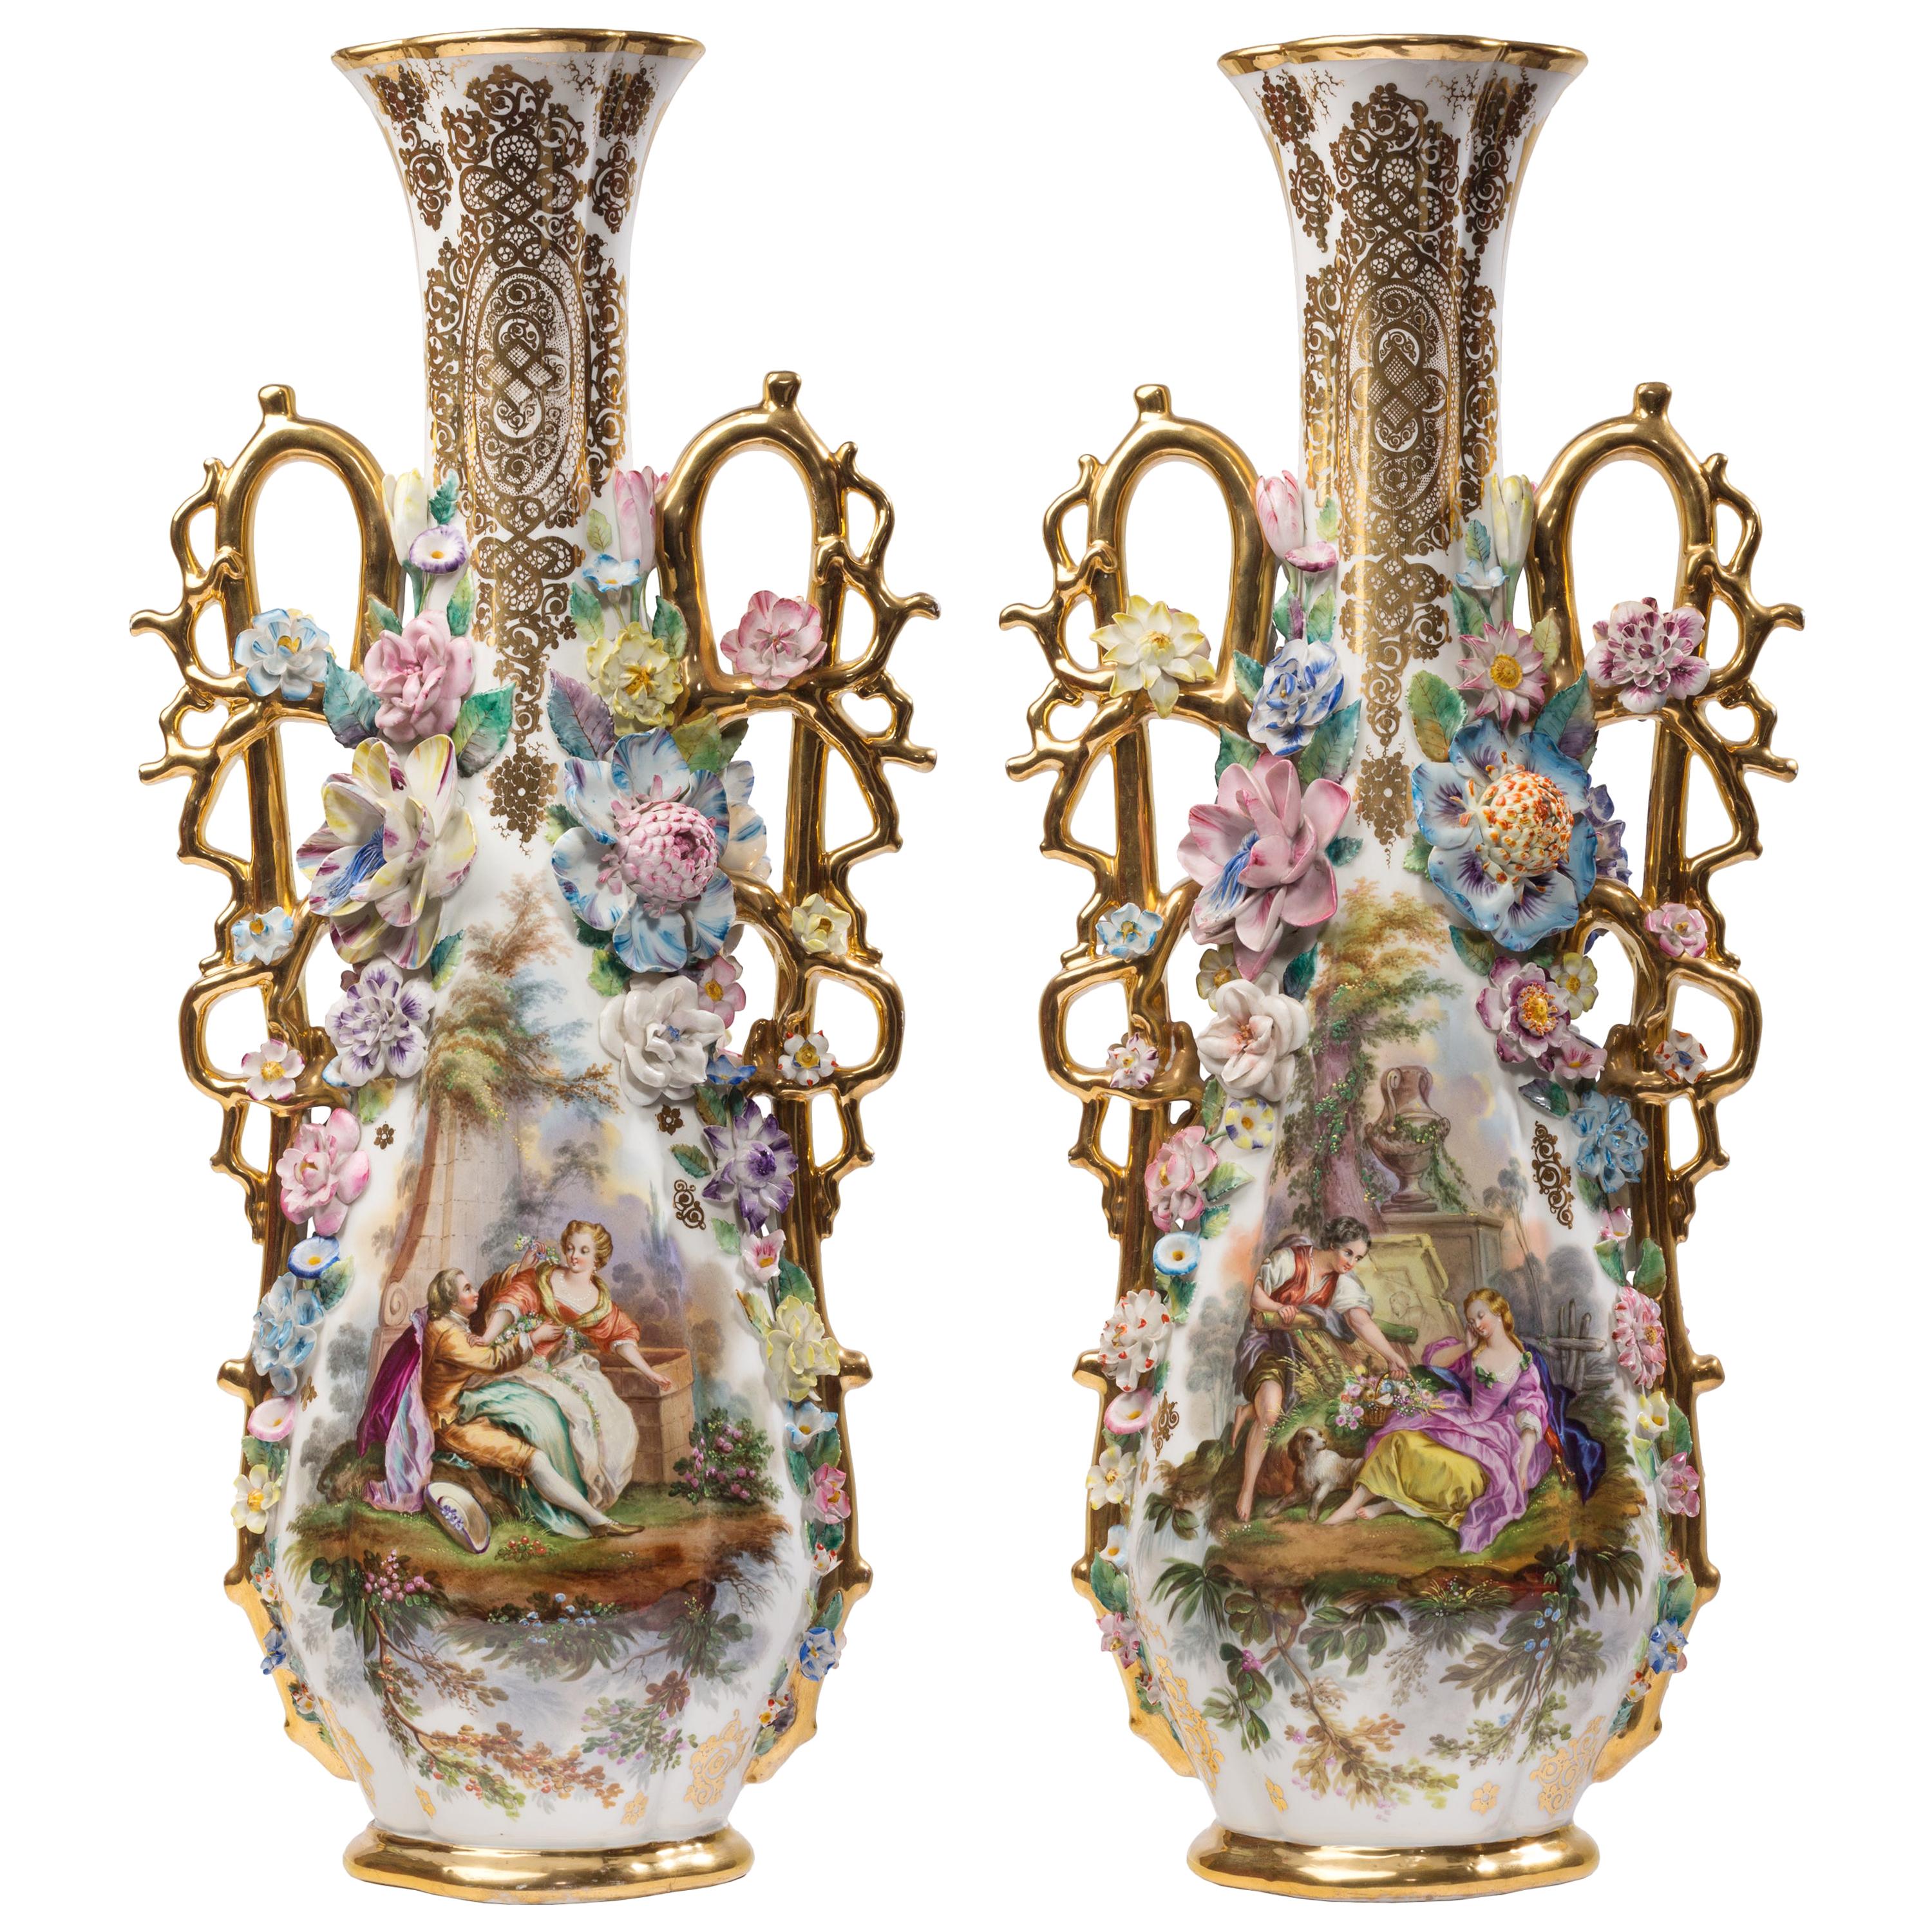 Pair of Highly Decorated Rococo Style French Porcelain Vases, Att. Jacob Petit